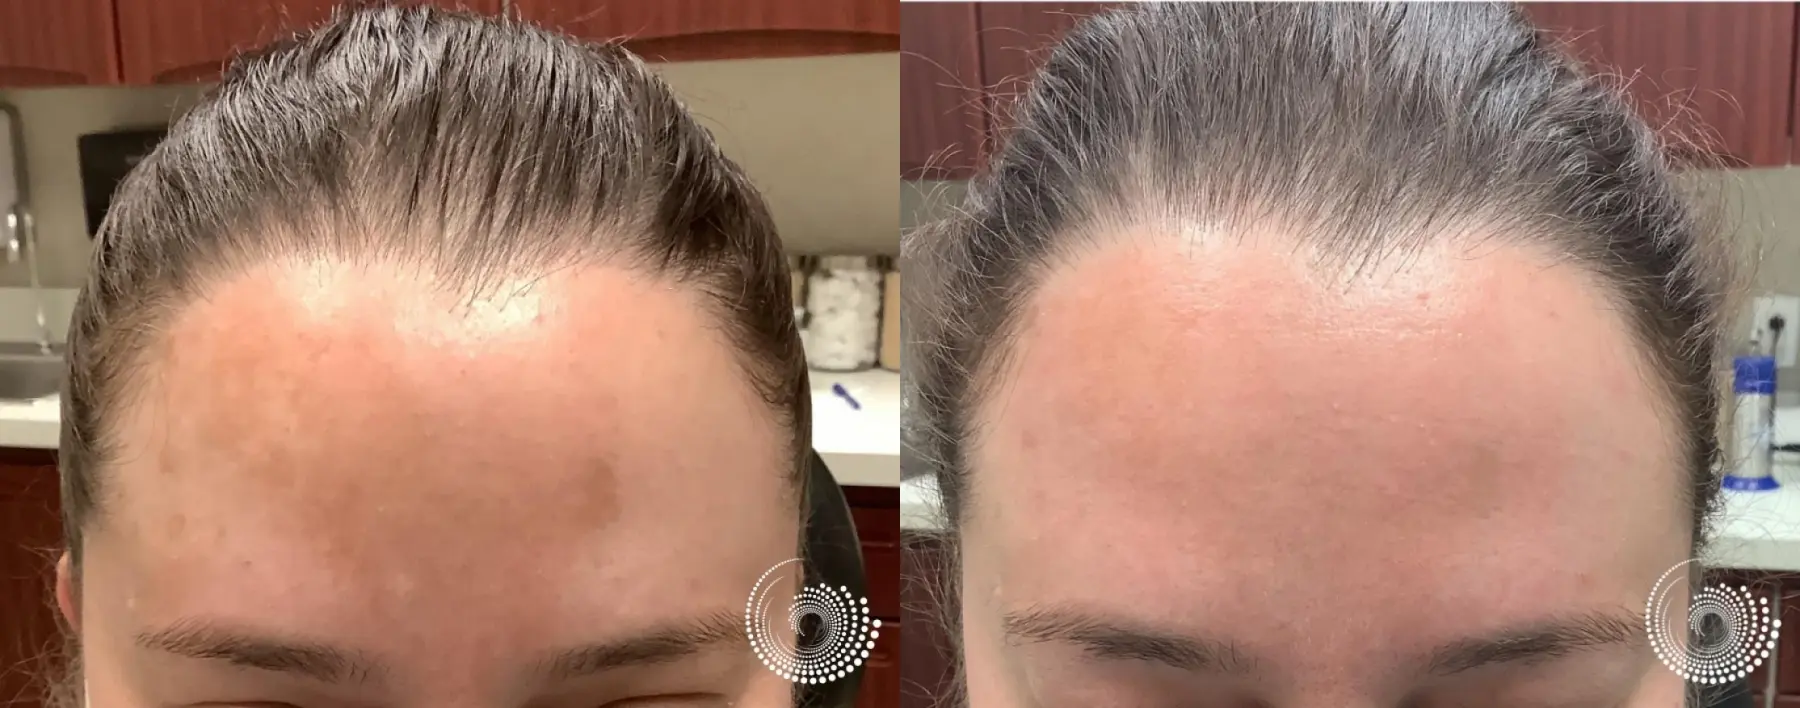 Melasma: Patient 1 - Before and After  